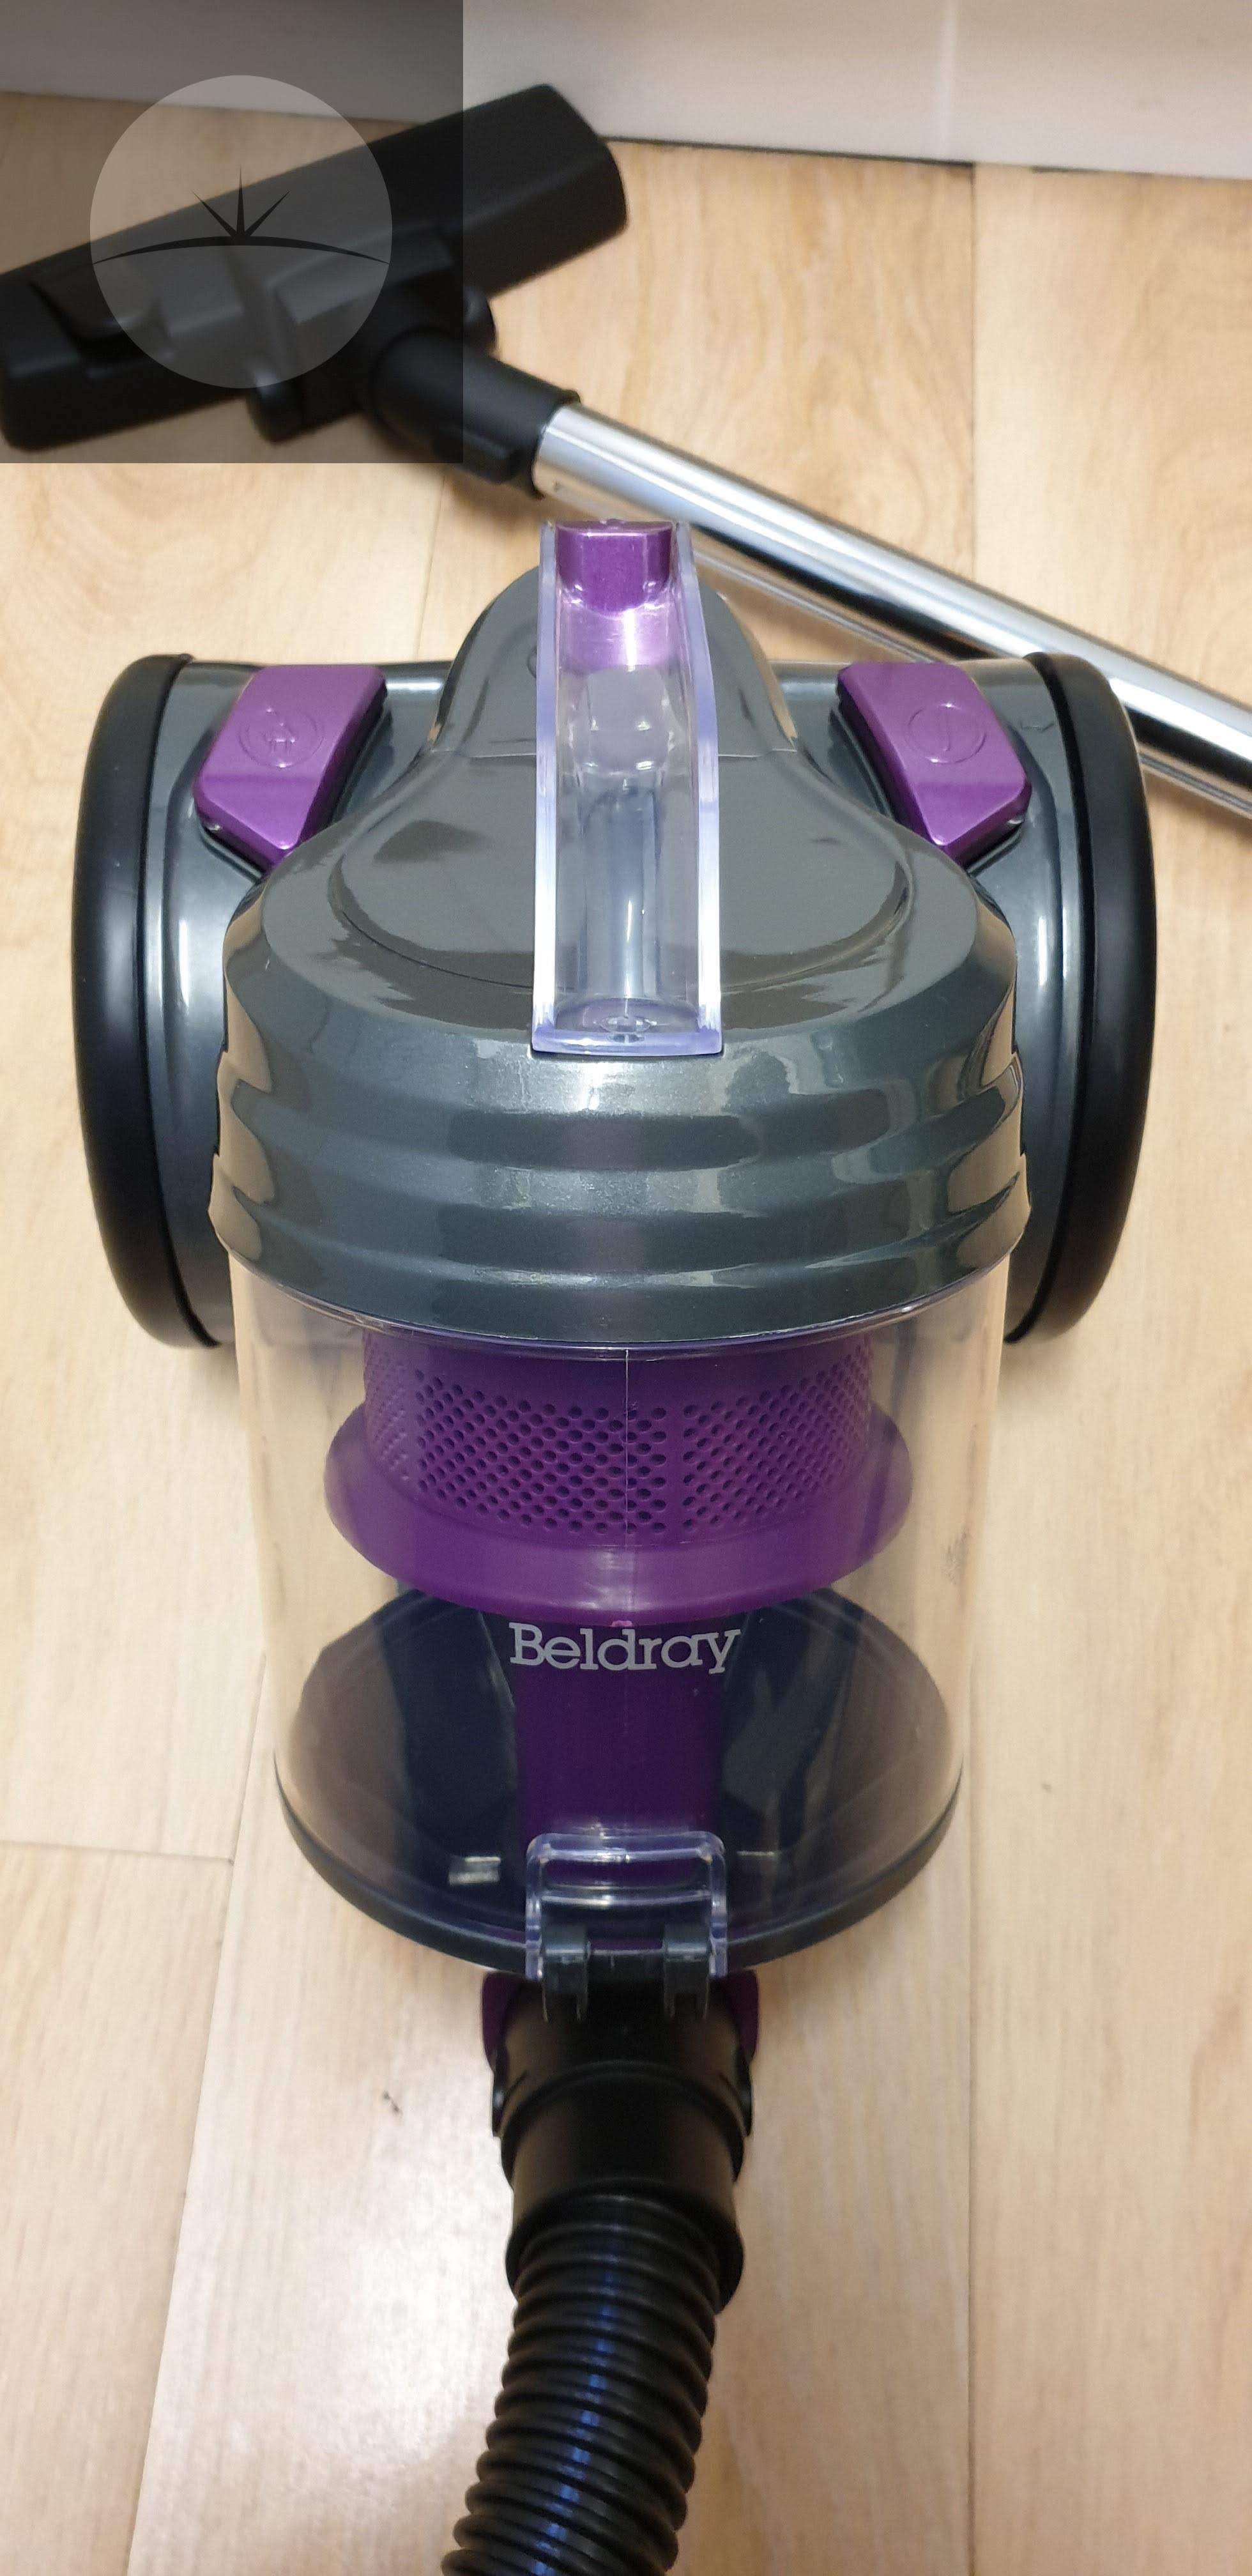 Beldray Compact Vac Lite Cylinder Vacuum Cleaner Review